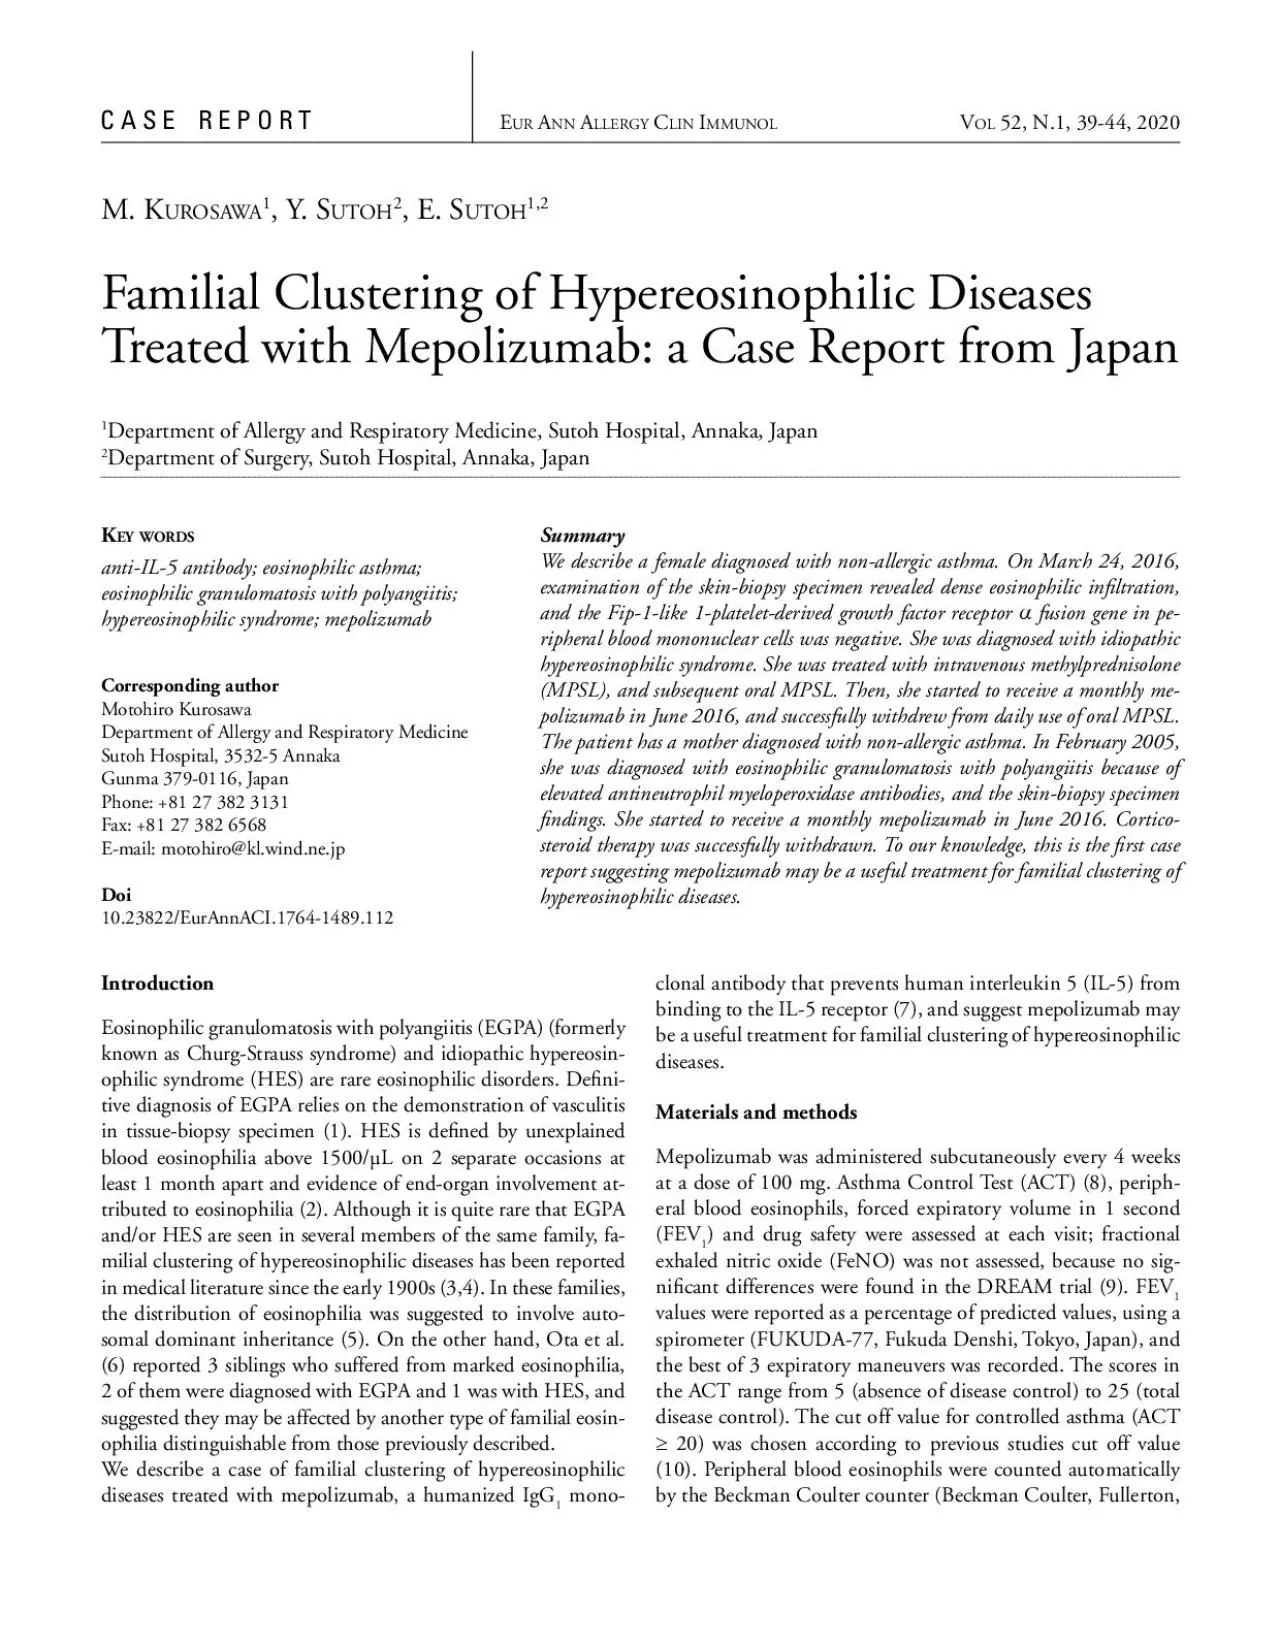 Familial Clustering of Hypereosinophilic Diseases Treated with Mepoliz